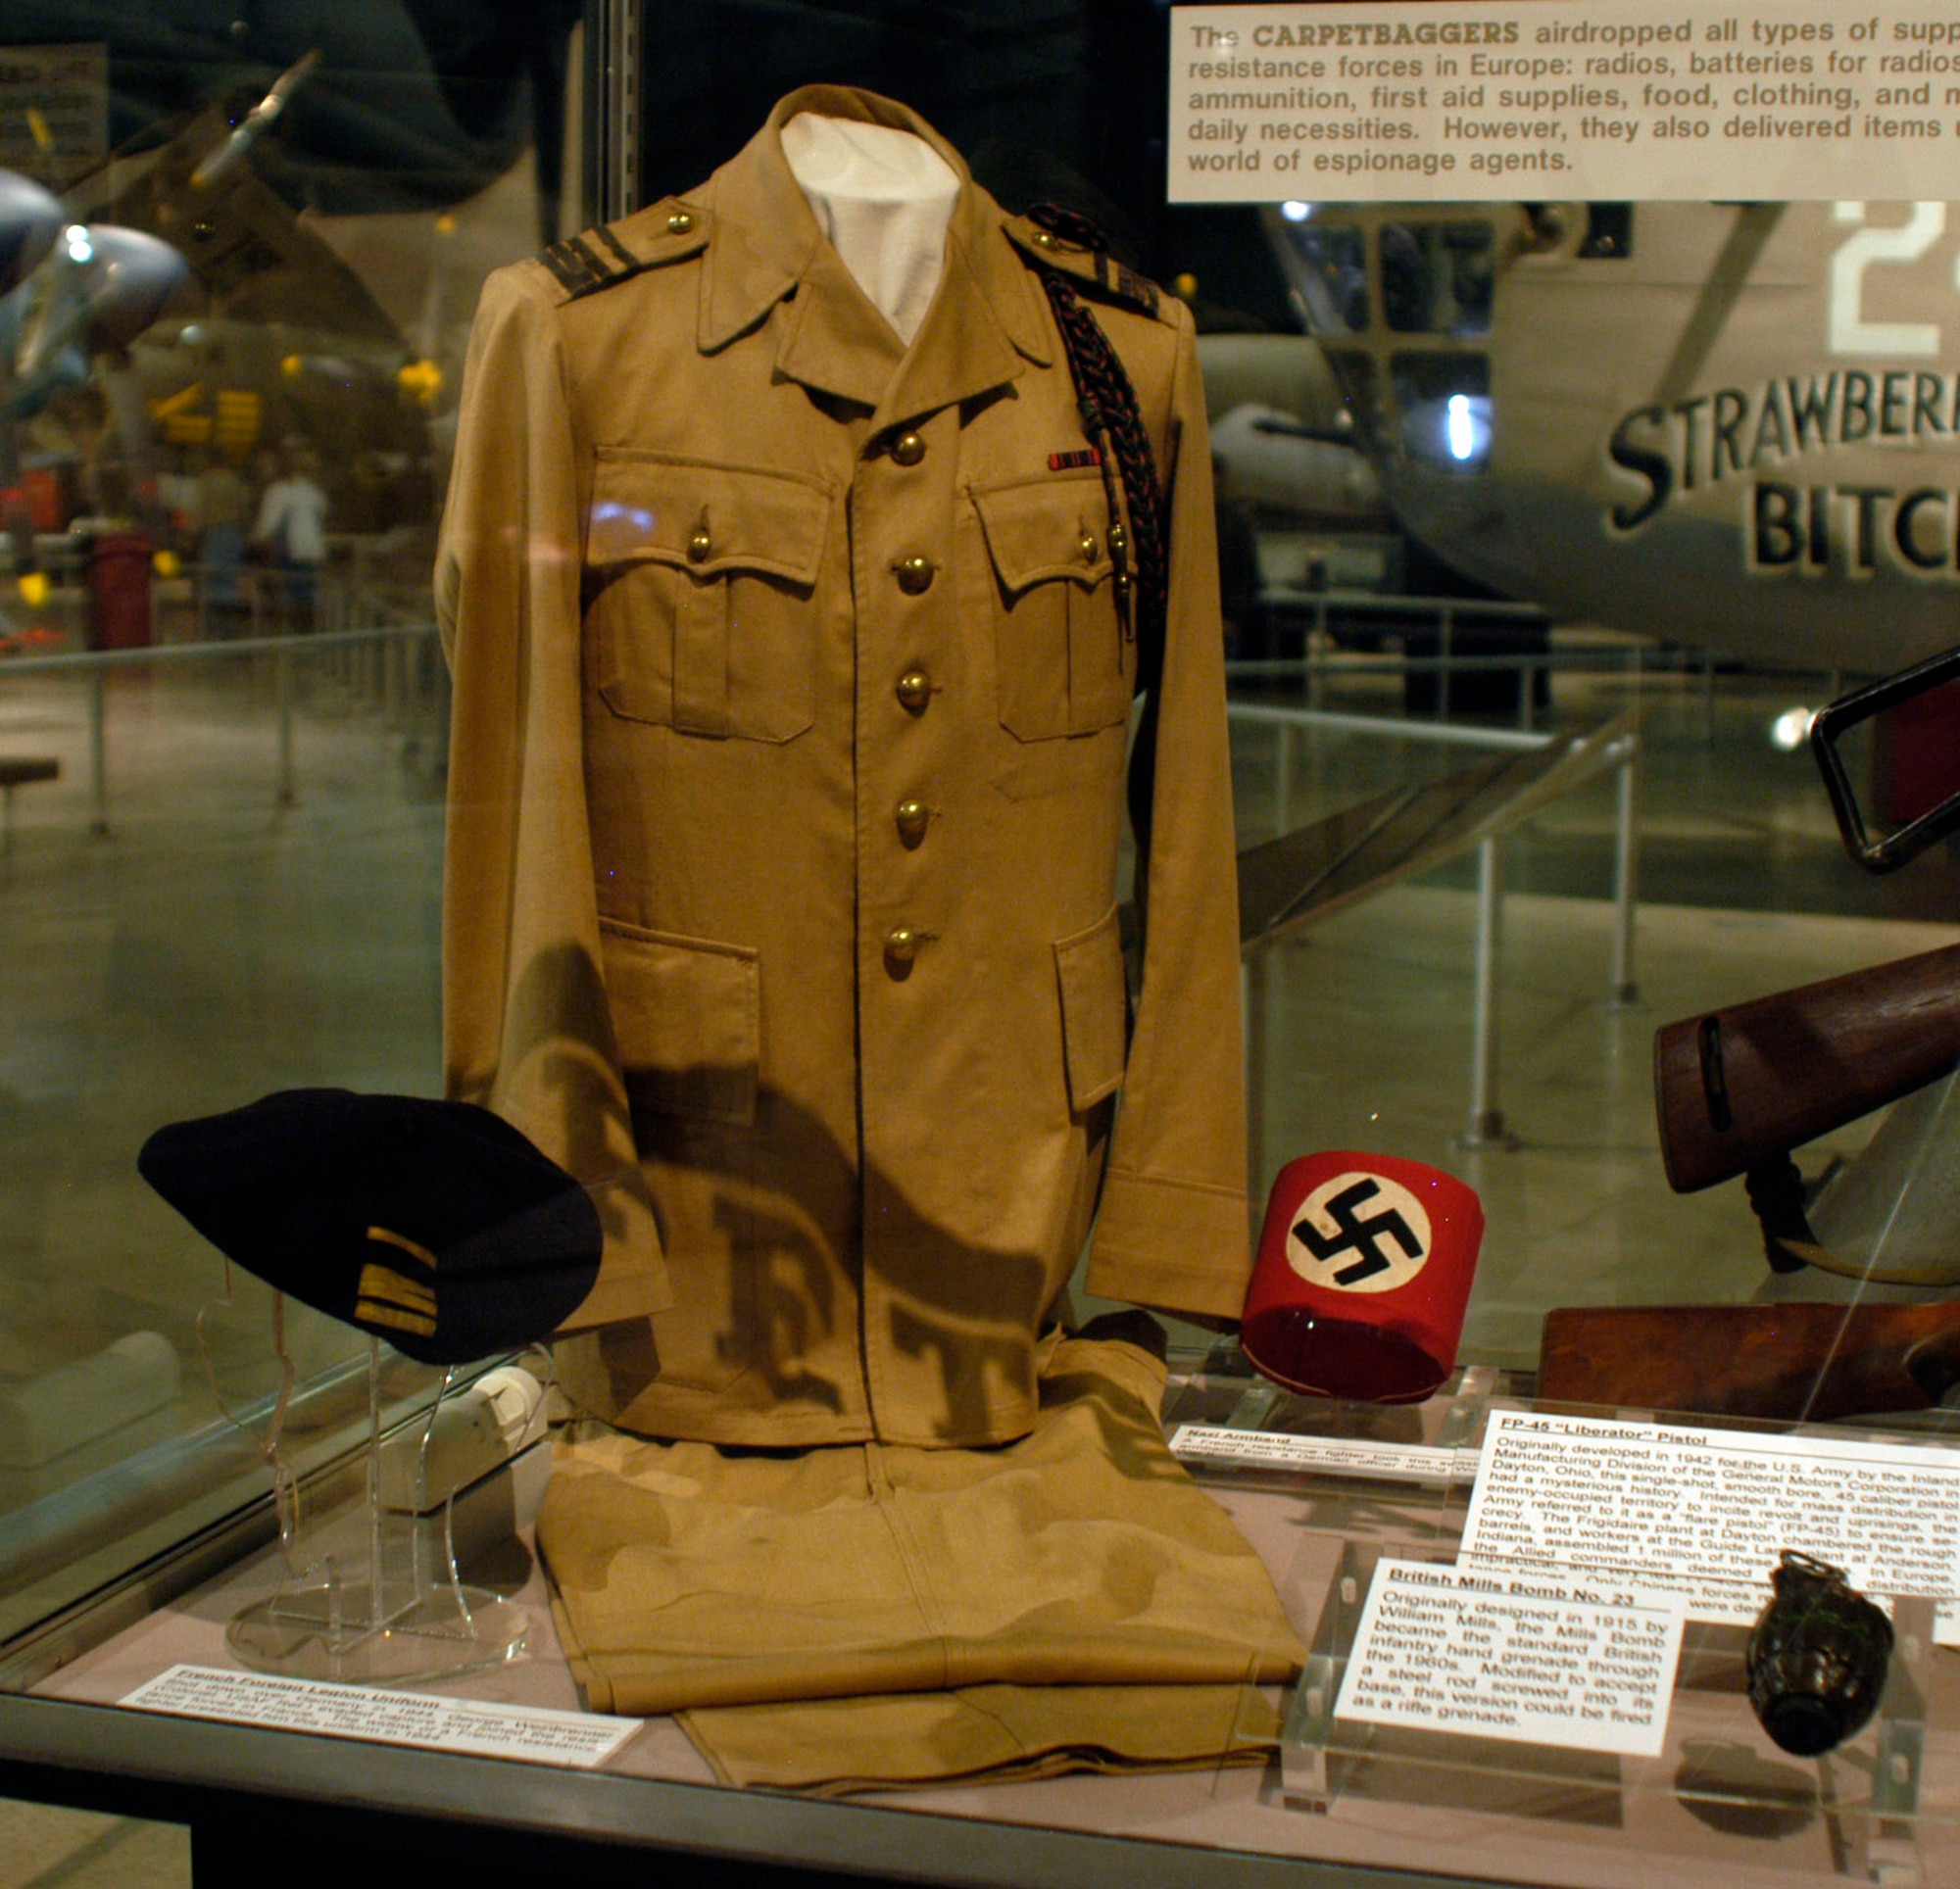 DAYTON, Ohio -- Shot down over Germany in 1944, Col. (Ret.) George Weinbrenner evaded capture and joined the resistance forces in France. The widow of a French resistance fighter presented him this uniform in 1944. The uniform is on display in the World War II Gallery at the National Museum of the U.S. Air Force. (U.S. Air Force photo)  